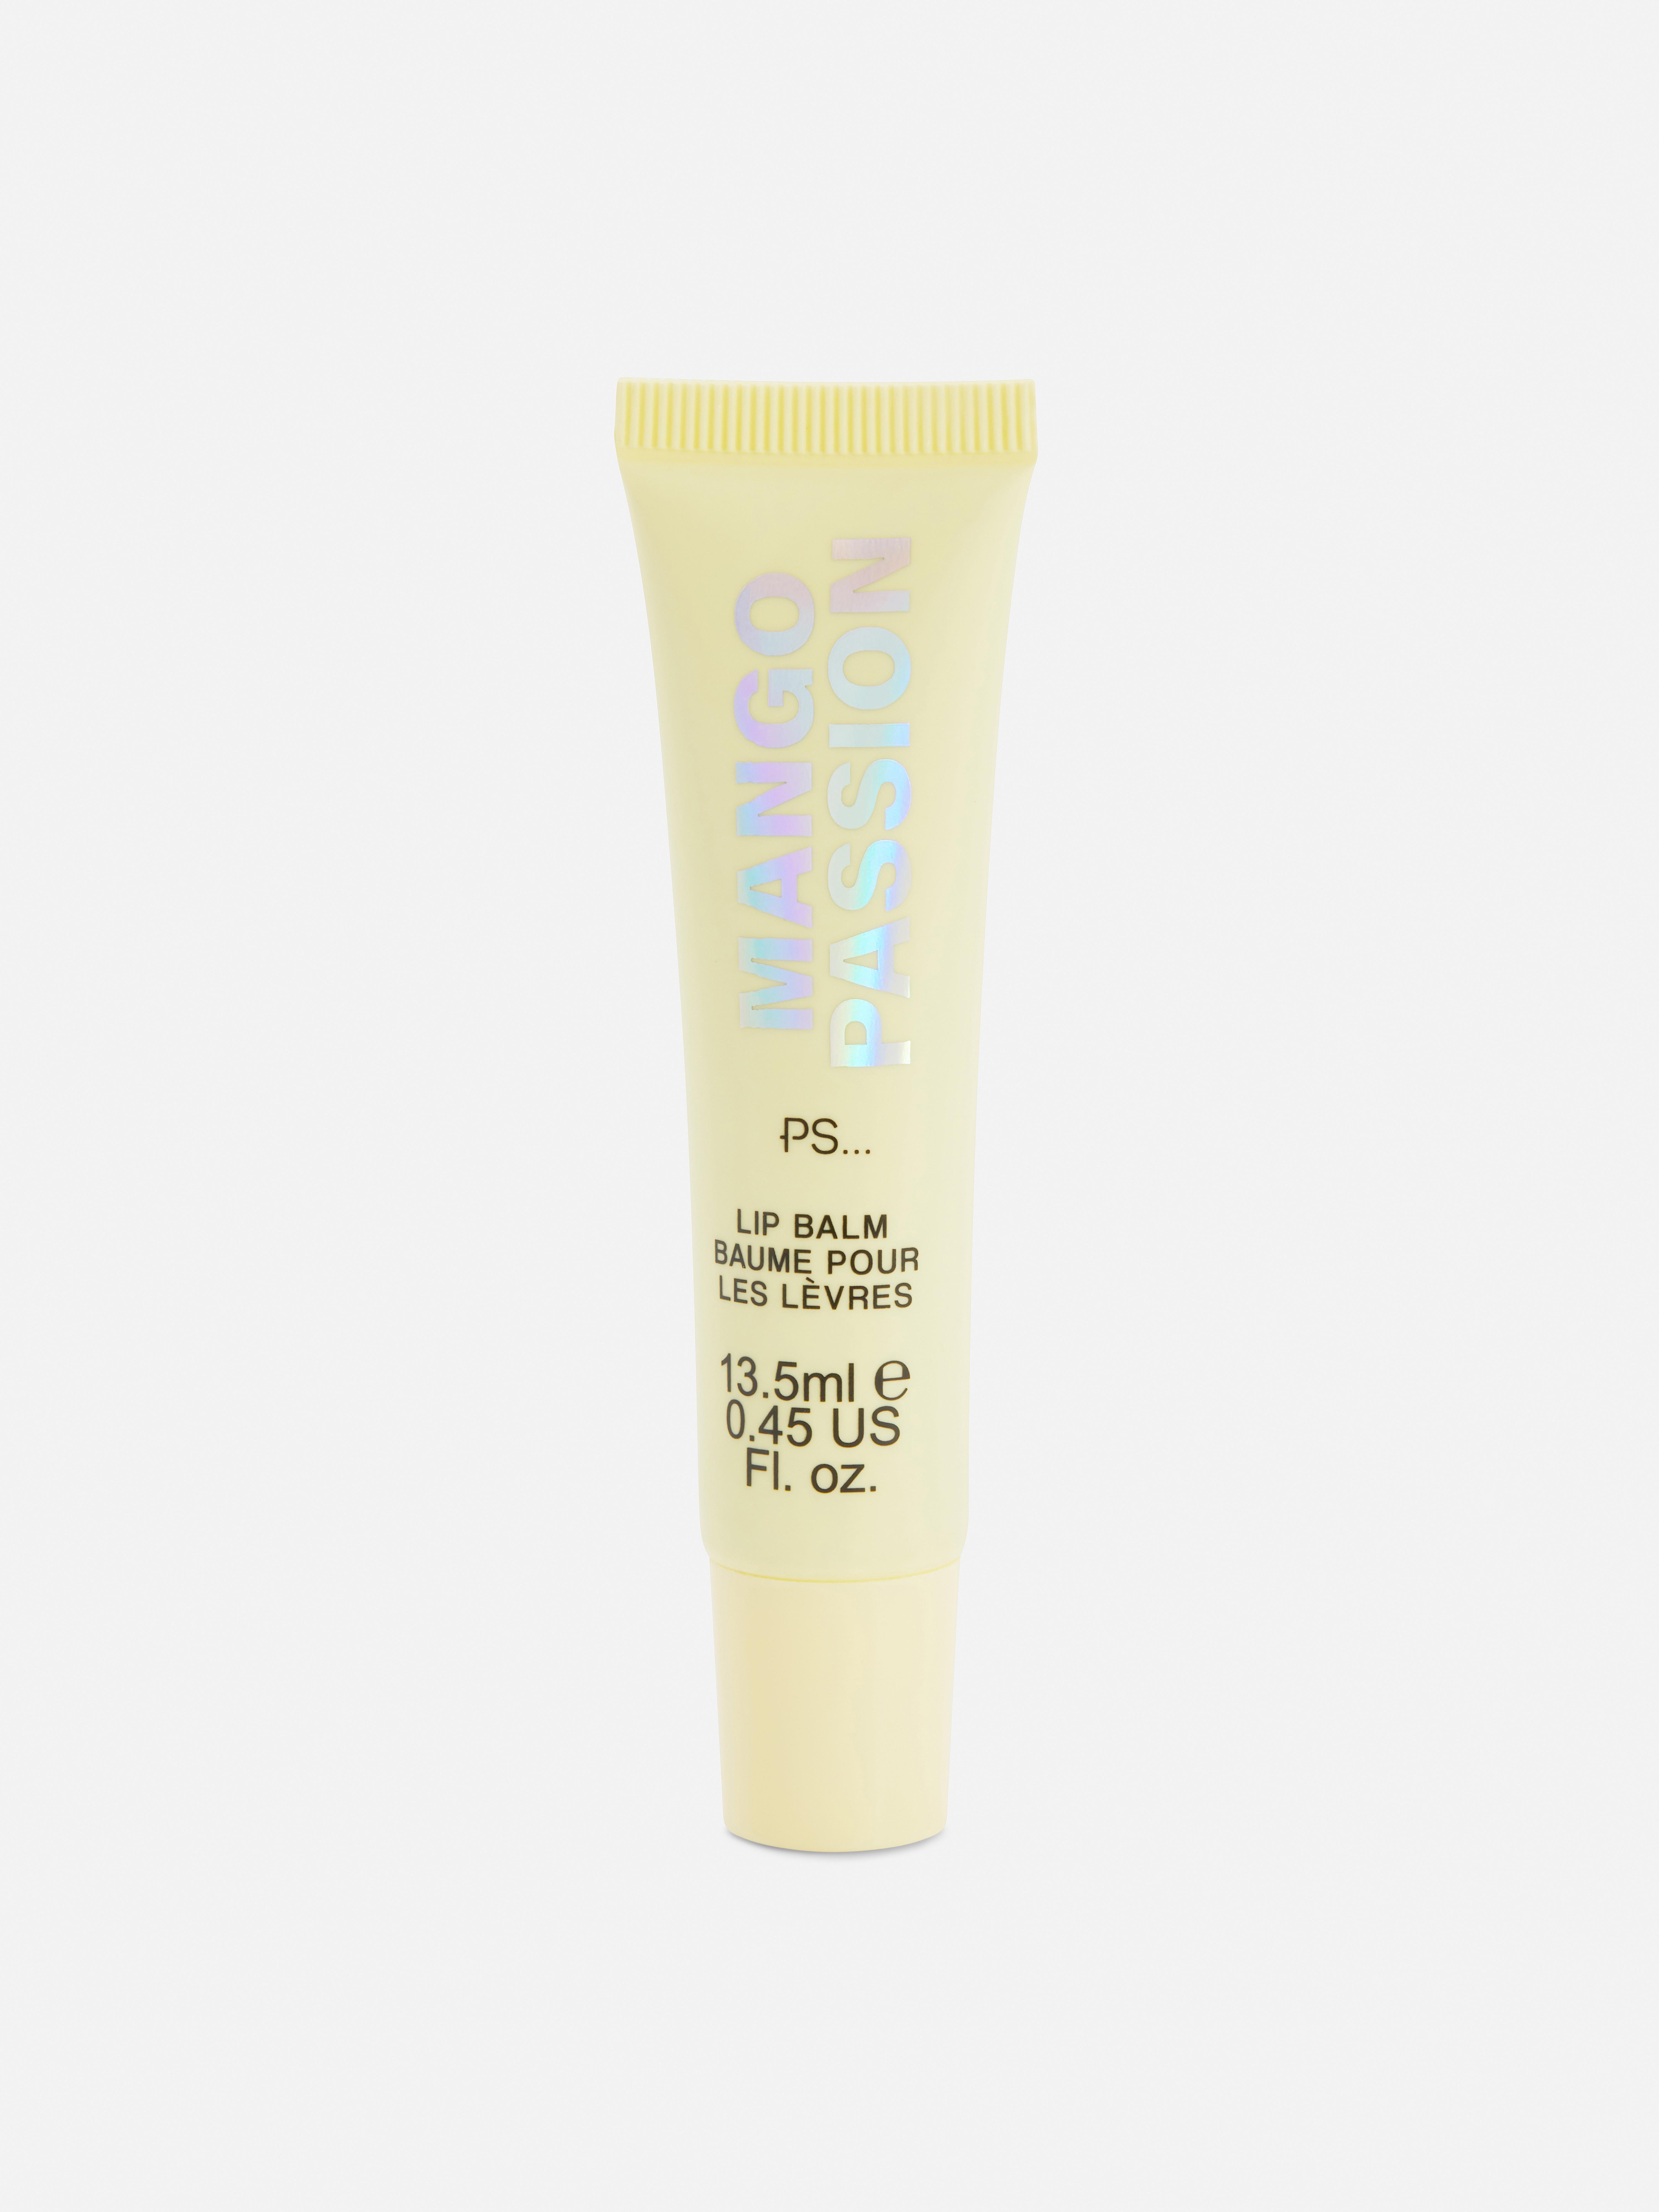 PS… Mango and Passionfruit Fragranced Lip Balm